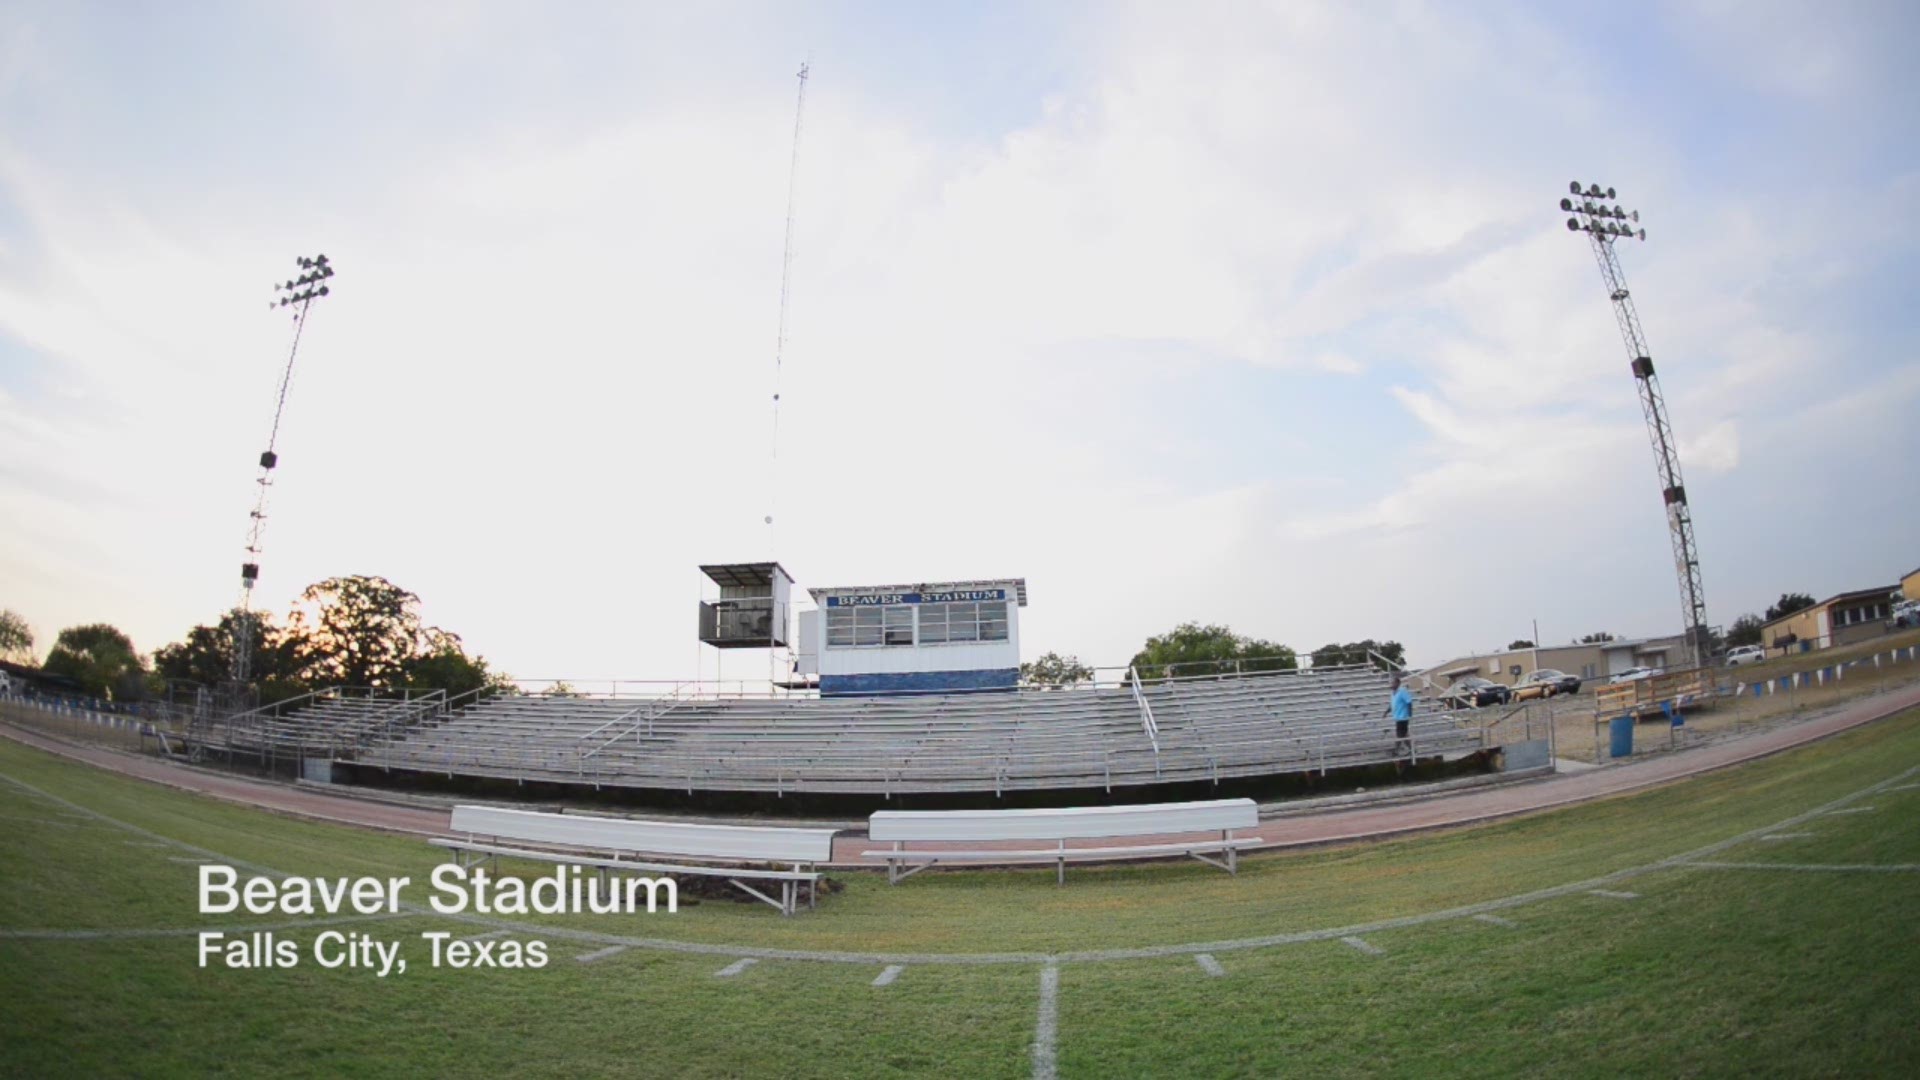 Whether you live in a small town such as Falls City, which has a population of a little more than 600, or one of the state's five largest cities, the start of the high school football season is one of the most anticipated days on the Texas sports calendar.